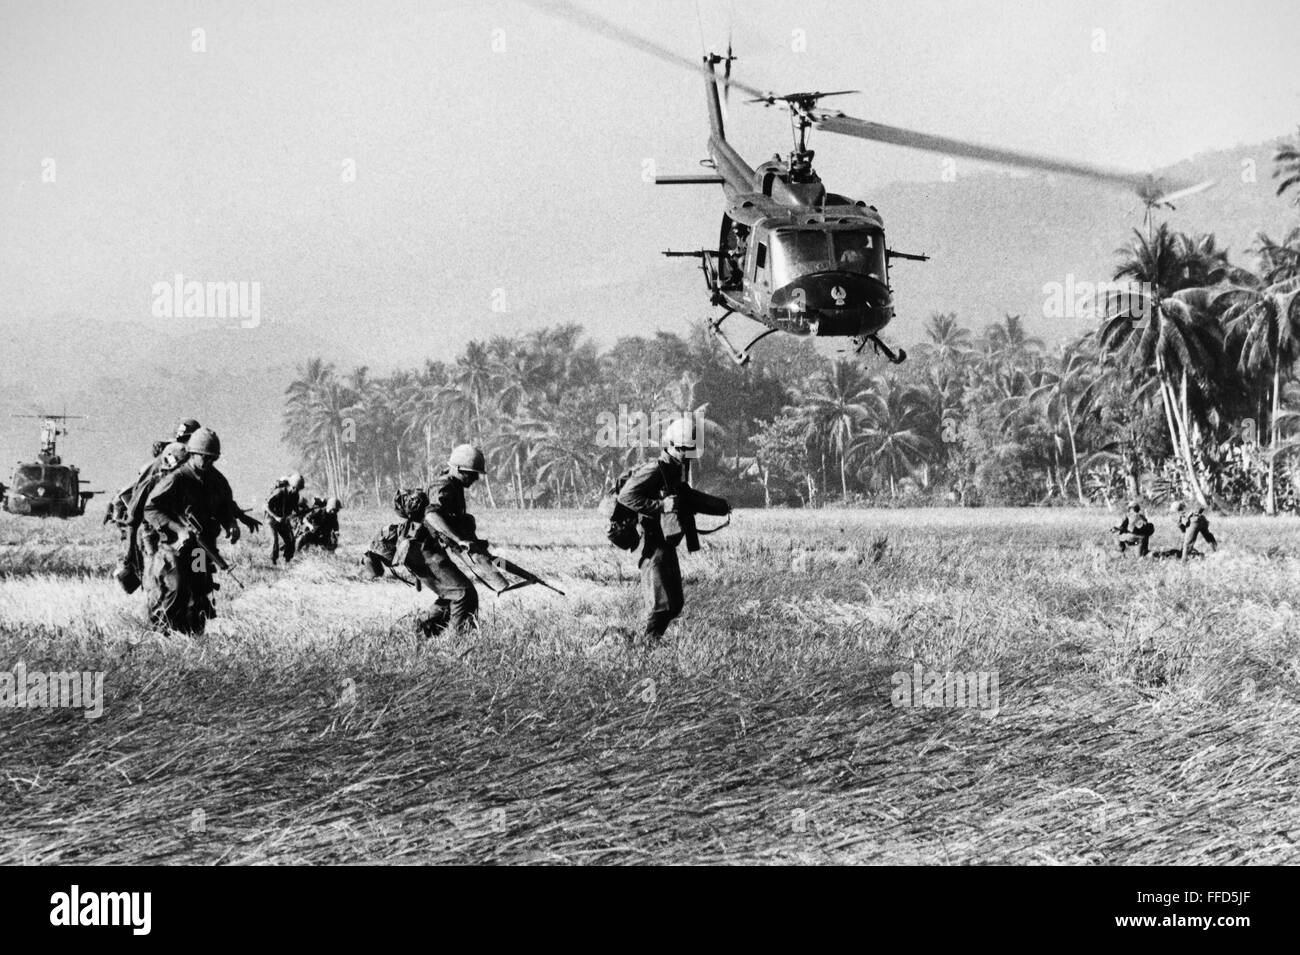 VIETNAM WAR: HELICOPTER. /nAmerican soldiers and helicopters in action in South Vietnam. Stock Photo